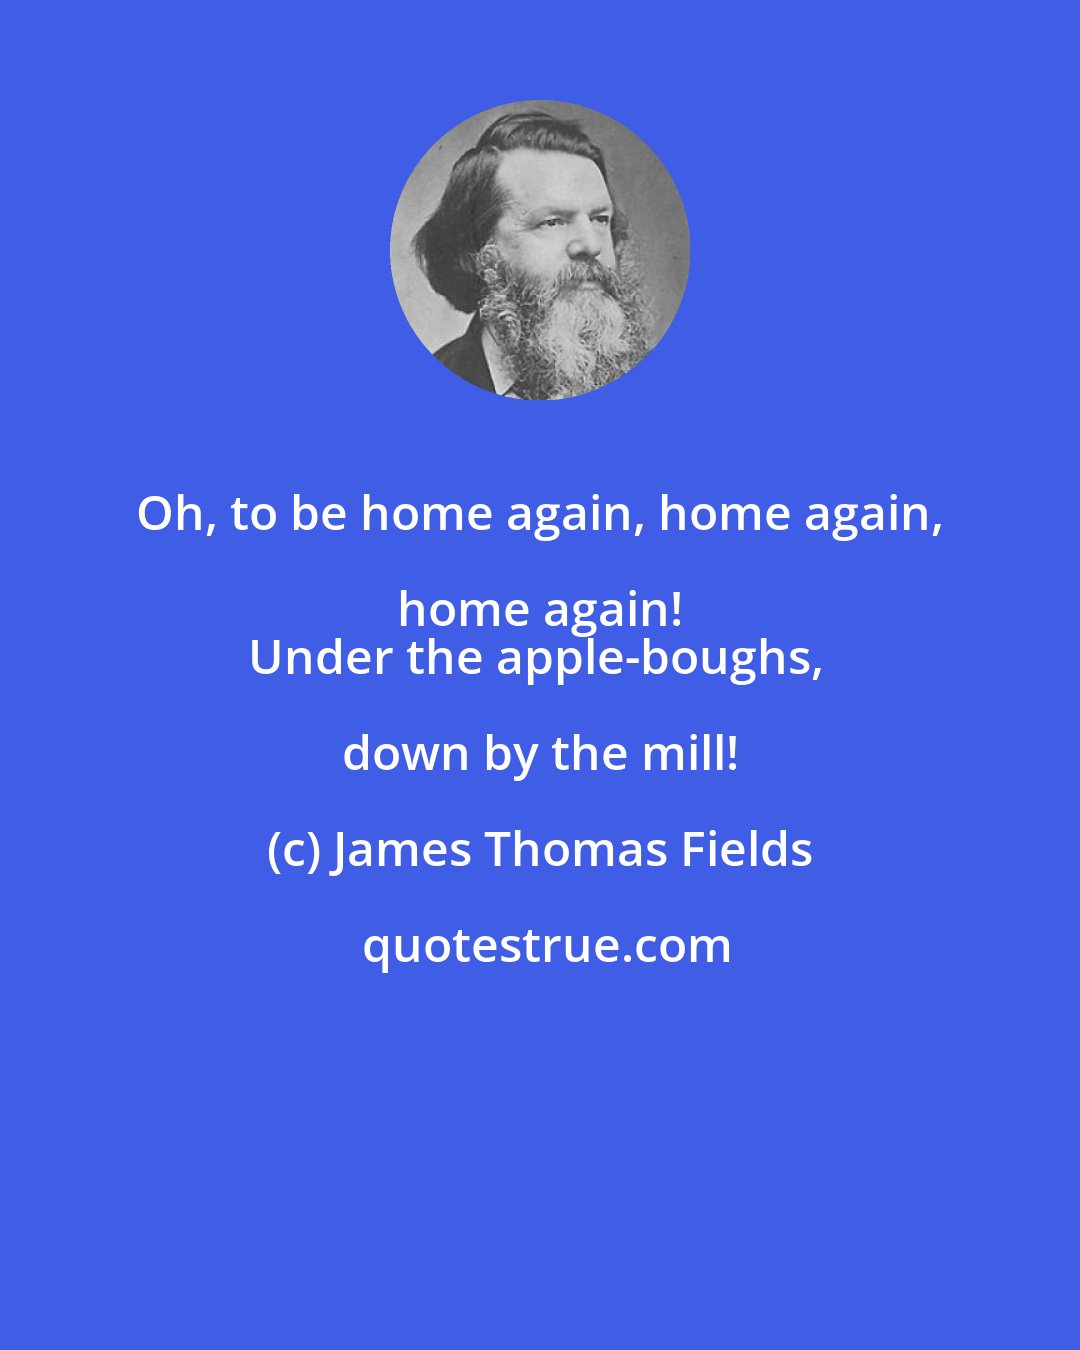 James Thomas Fields: Oh, to be home again, home again, home again! 
Under the apple-boughs, down by the mill!